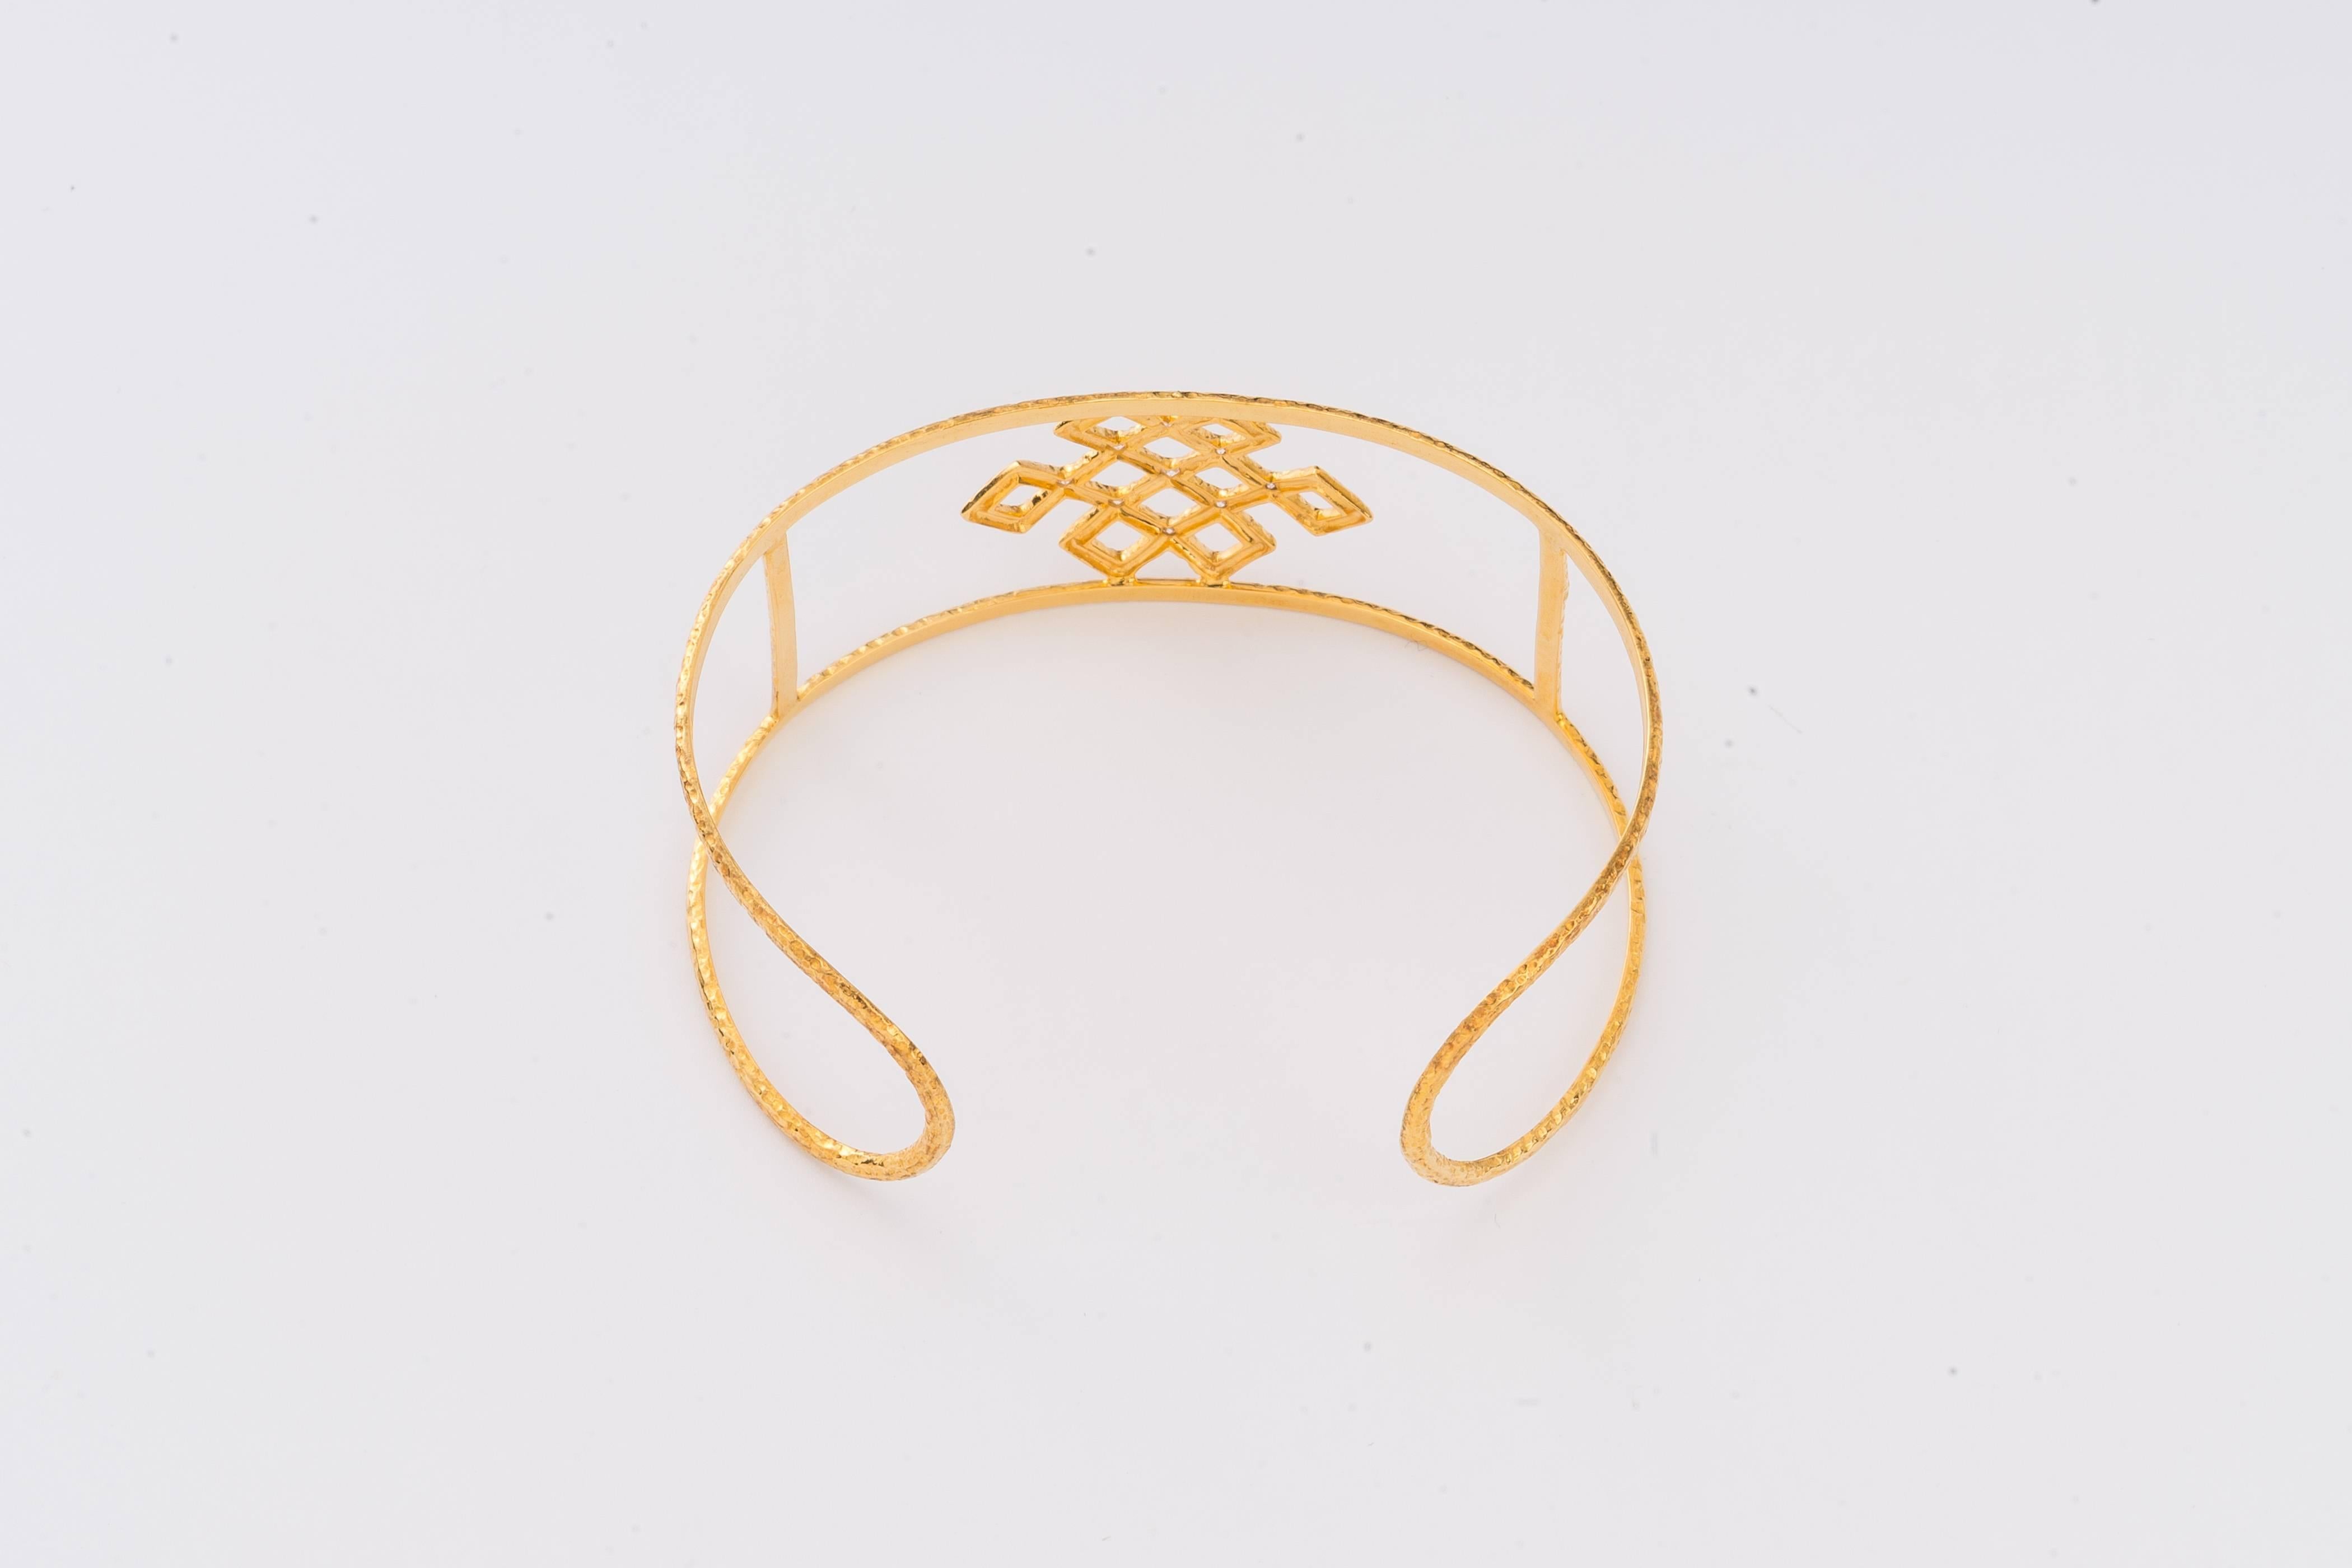 The hand-worked 18-Karat gold cuff is from our Heritage Collection of Chinoiserie designs.  height 1 inch (2.5cmH), hand-hammered and centered with an openwork endless knot (eternity, intertwining of wisdom & compassion symbol) decorated with